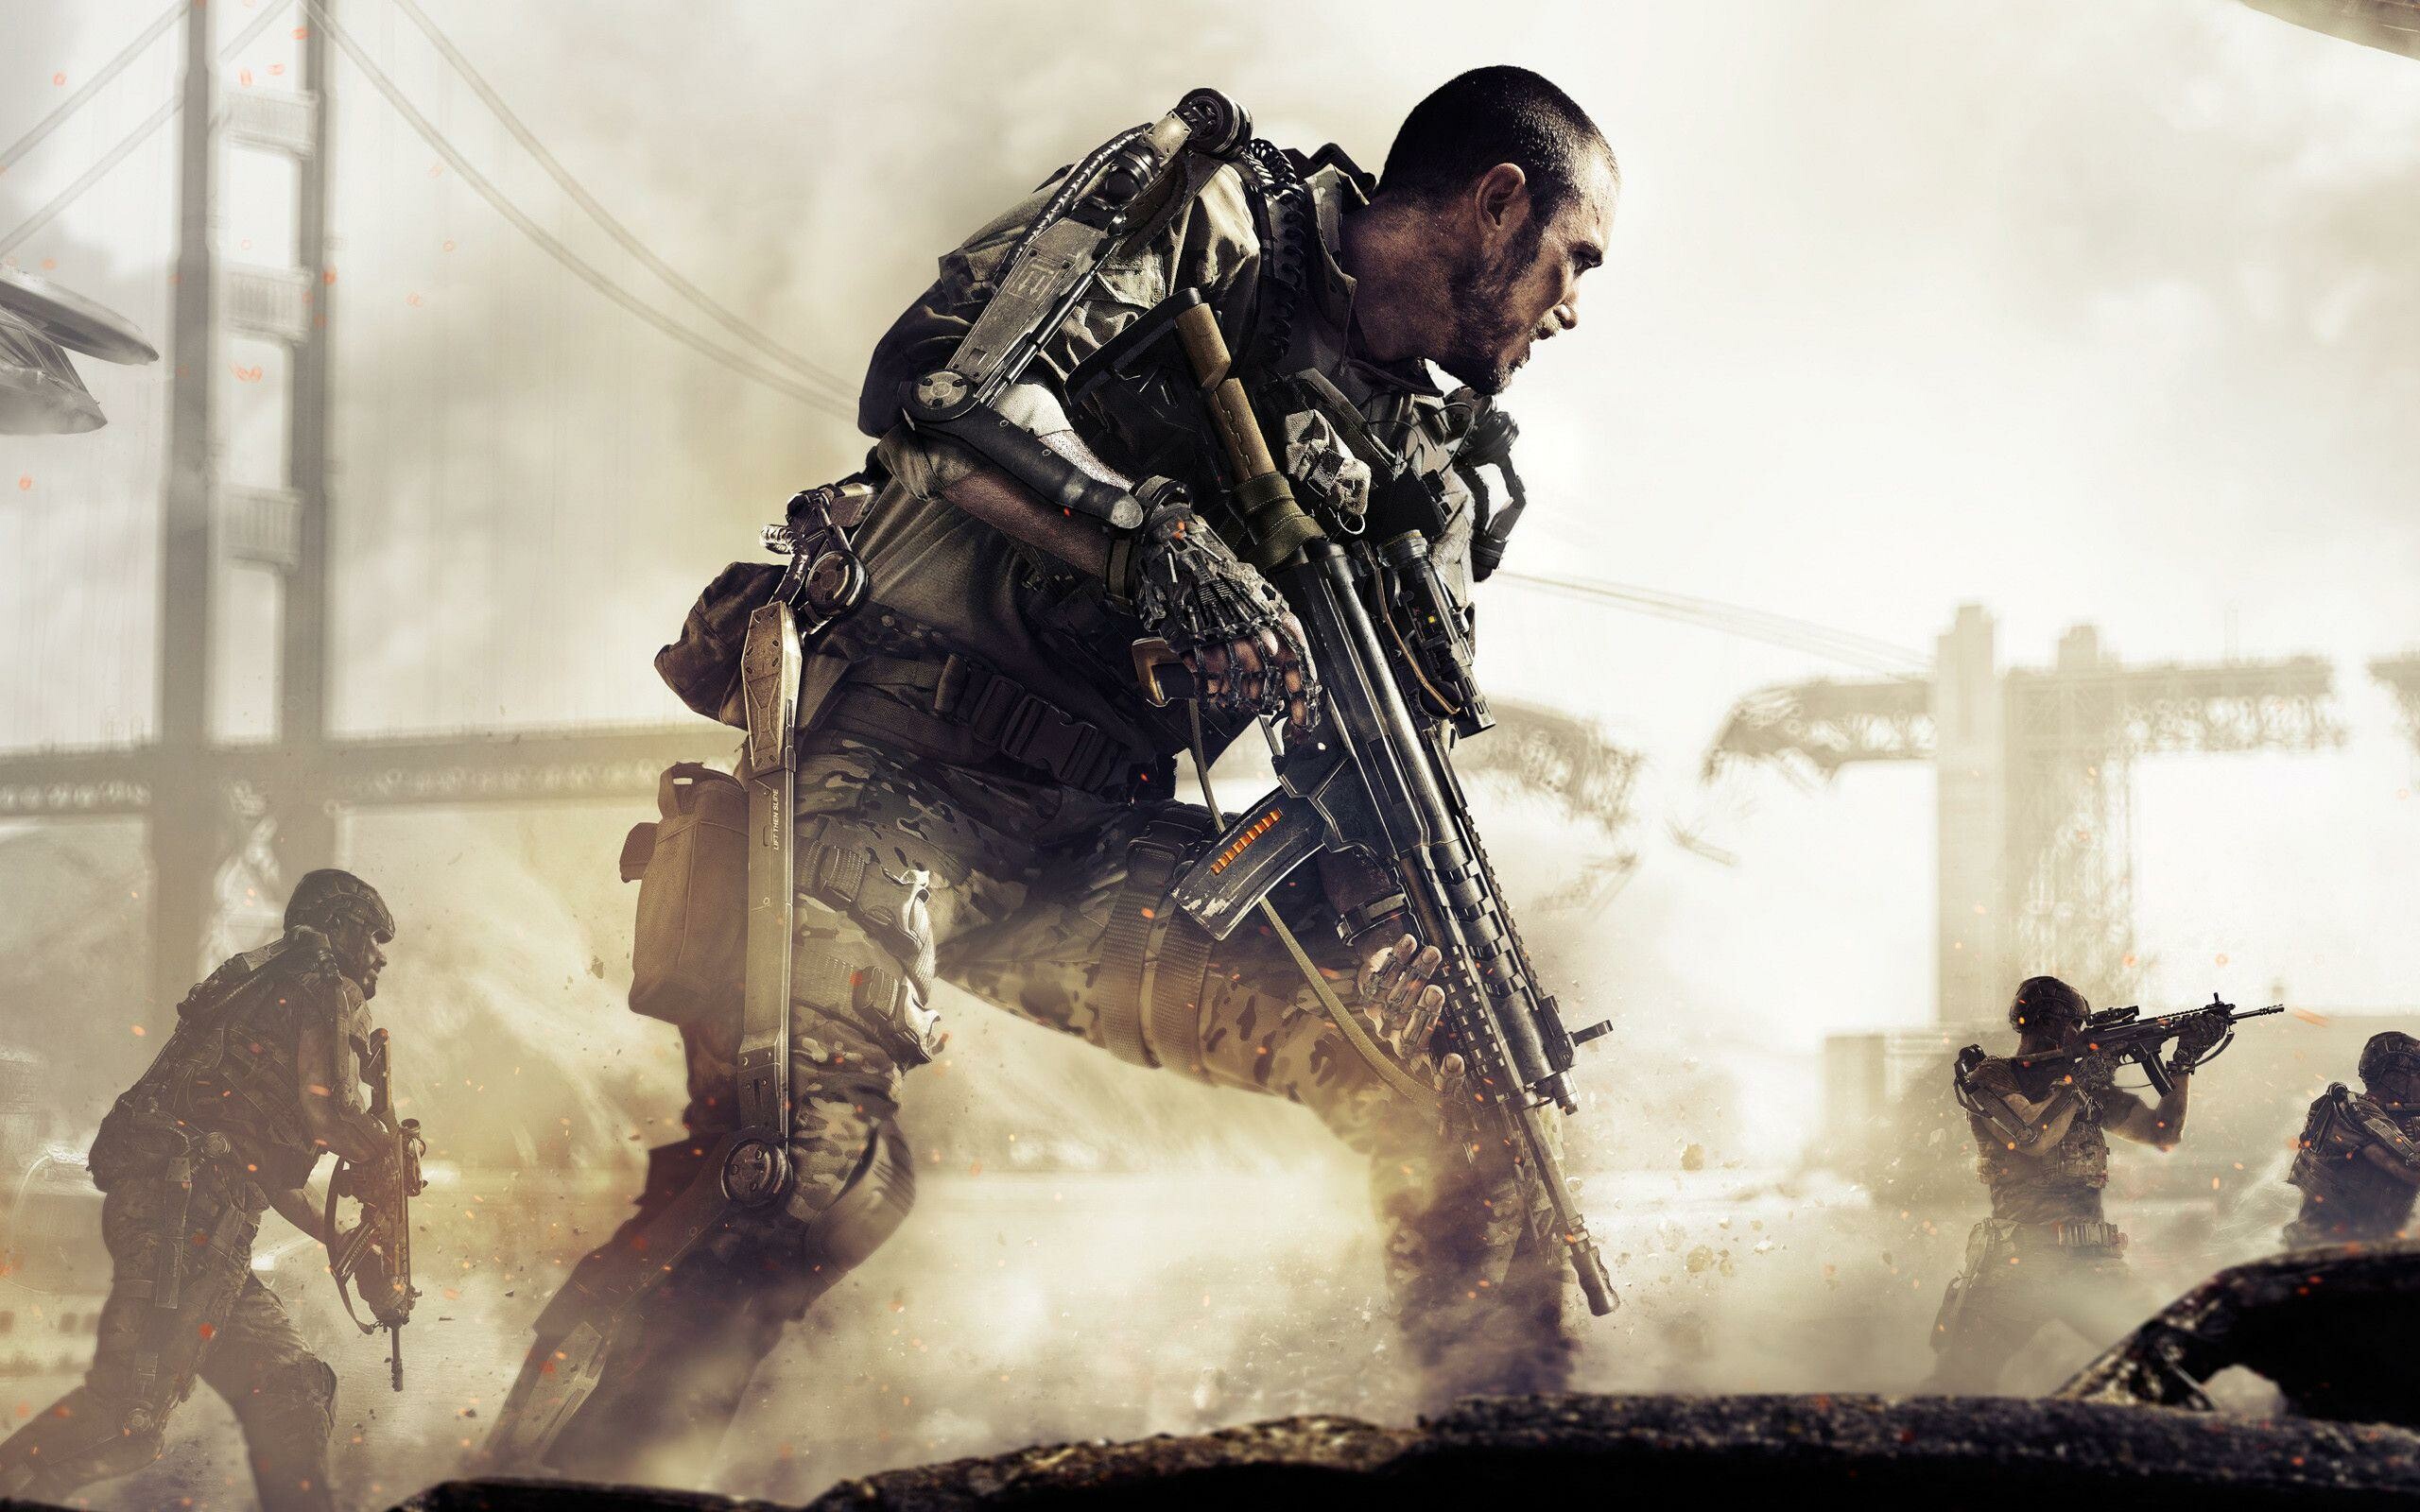 Call of Duty, Action-packed, Thrilling missions, Warzone chaos, 2560x1600 HD Desktop